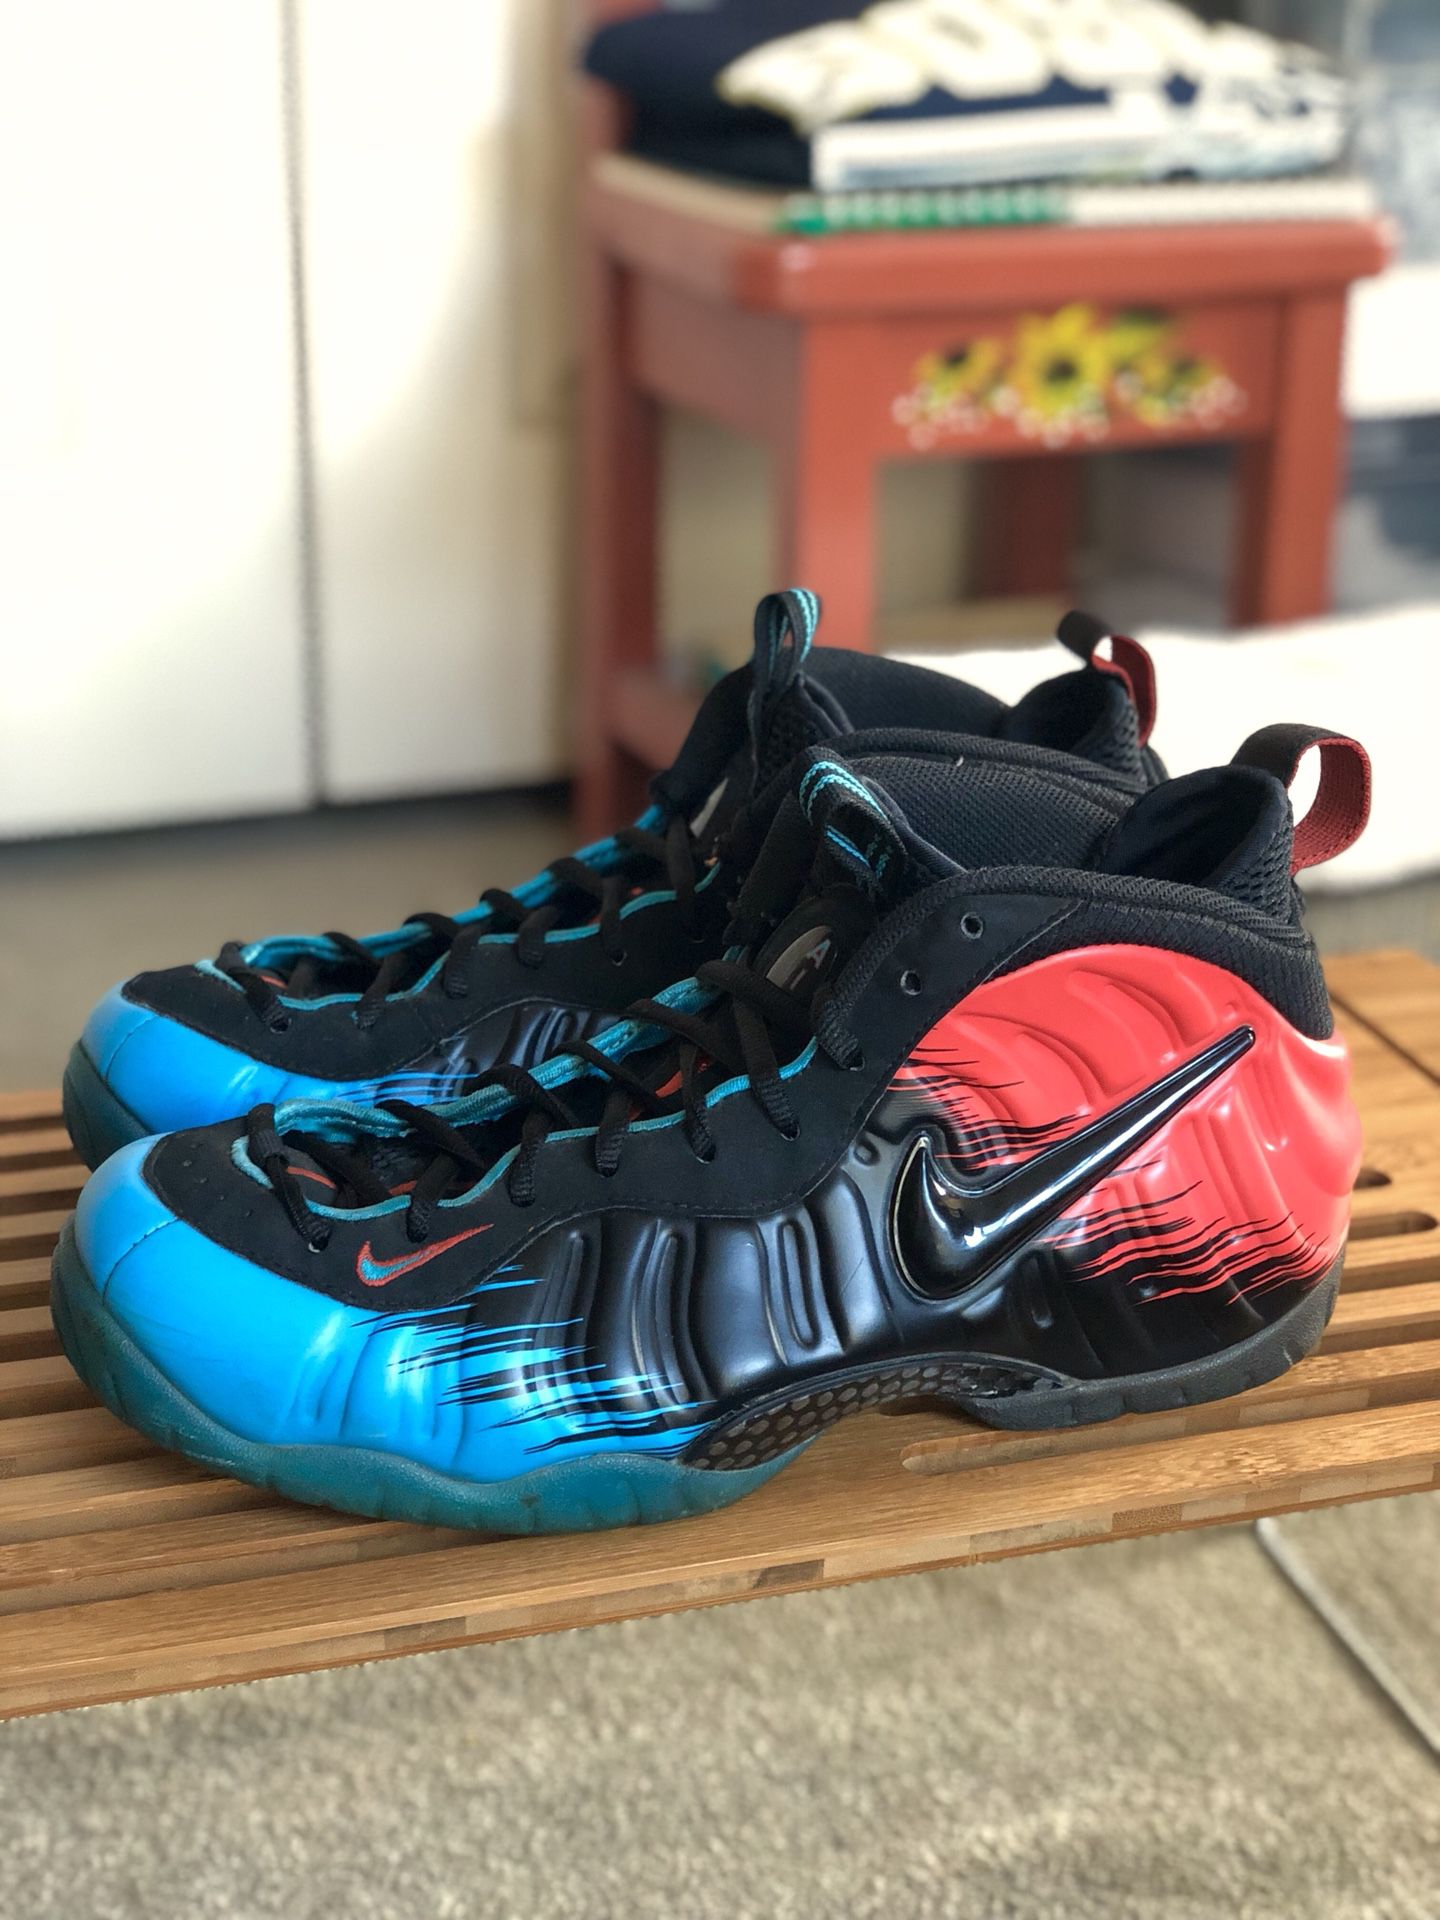 NIKE Air Foamposite Pro “SPIDERMAN” (2014) - Size 9.5 for Sale in Los  Angeles, CA - OfferUp